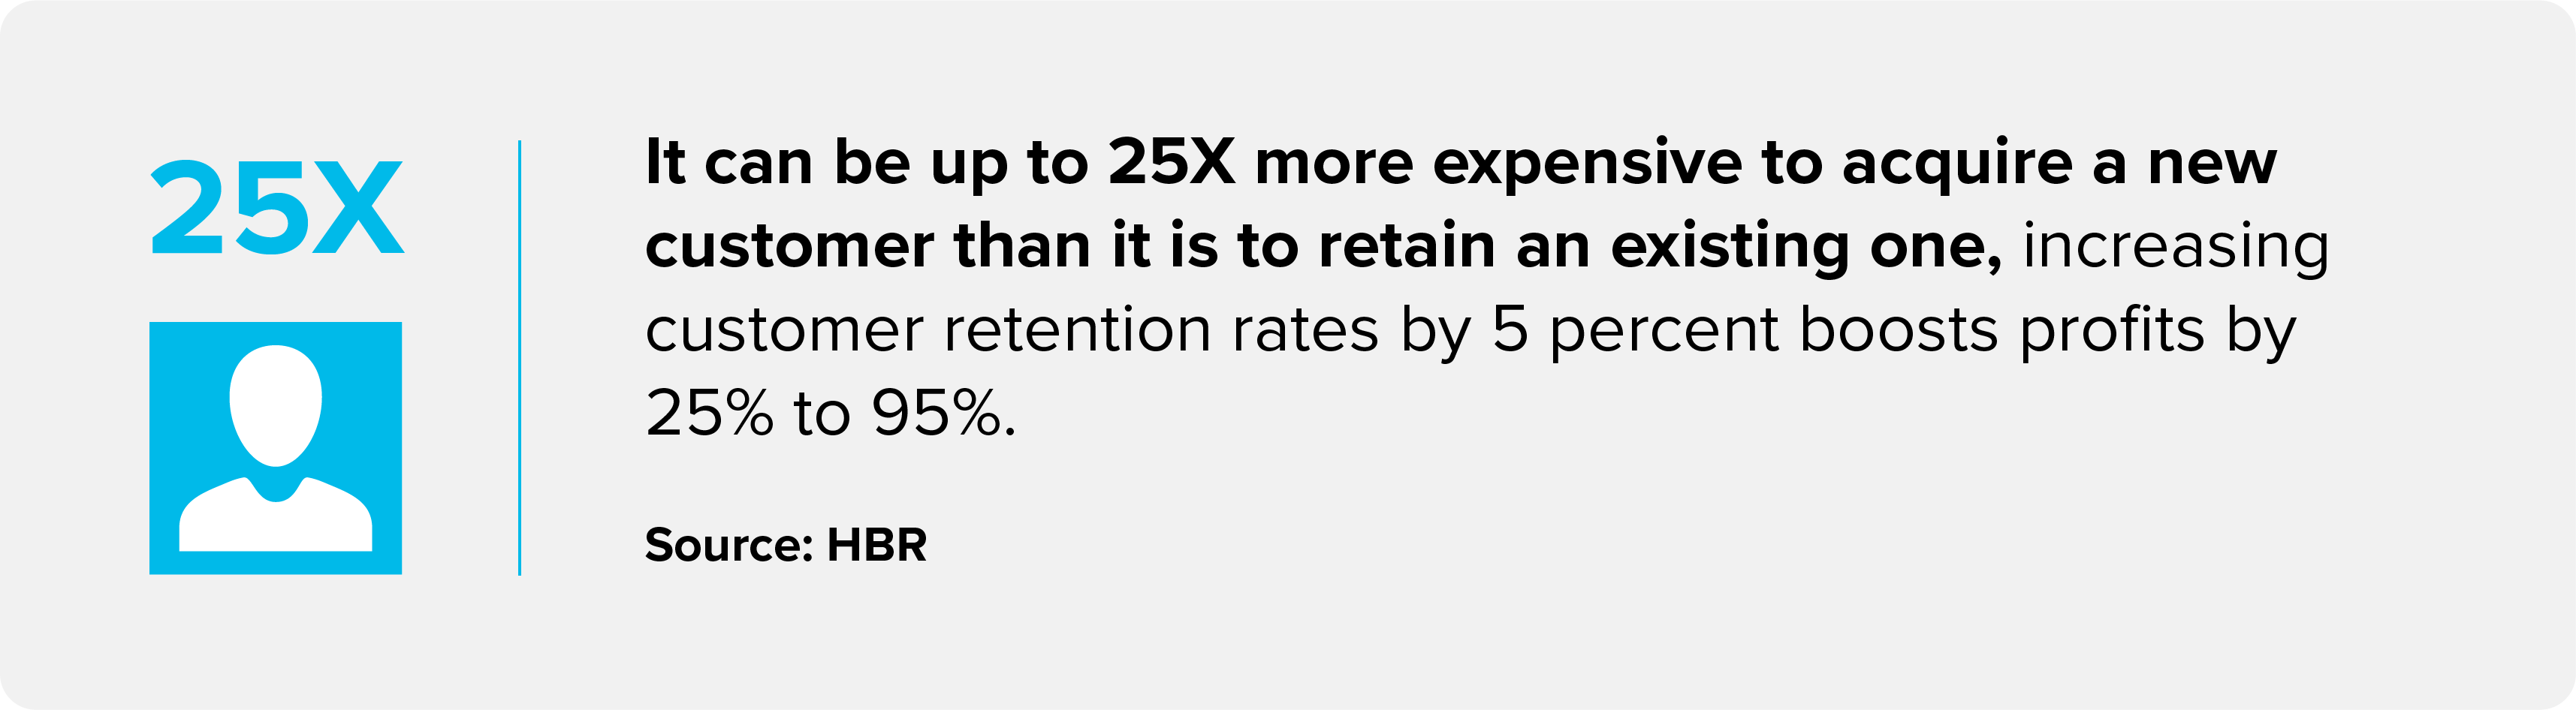 An image showcasing stat on how it is 25X more expensive to acquire a new customer than retaining an existing one.